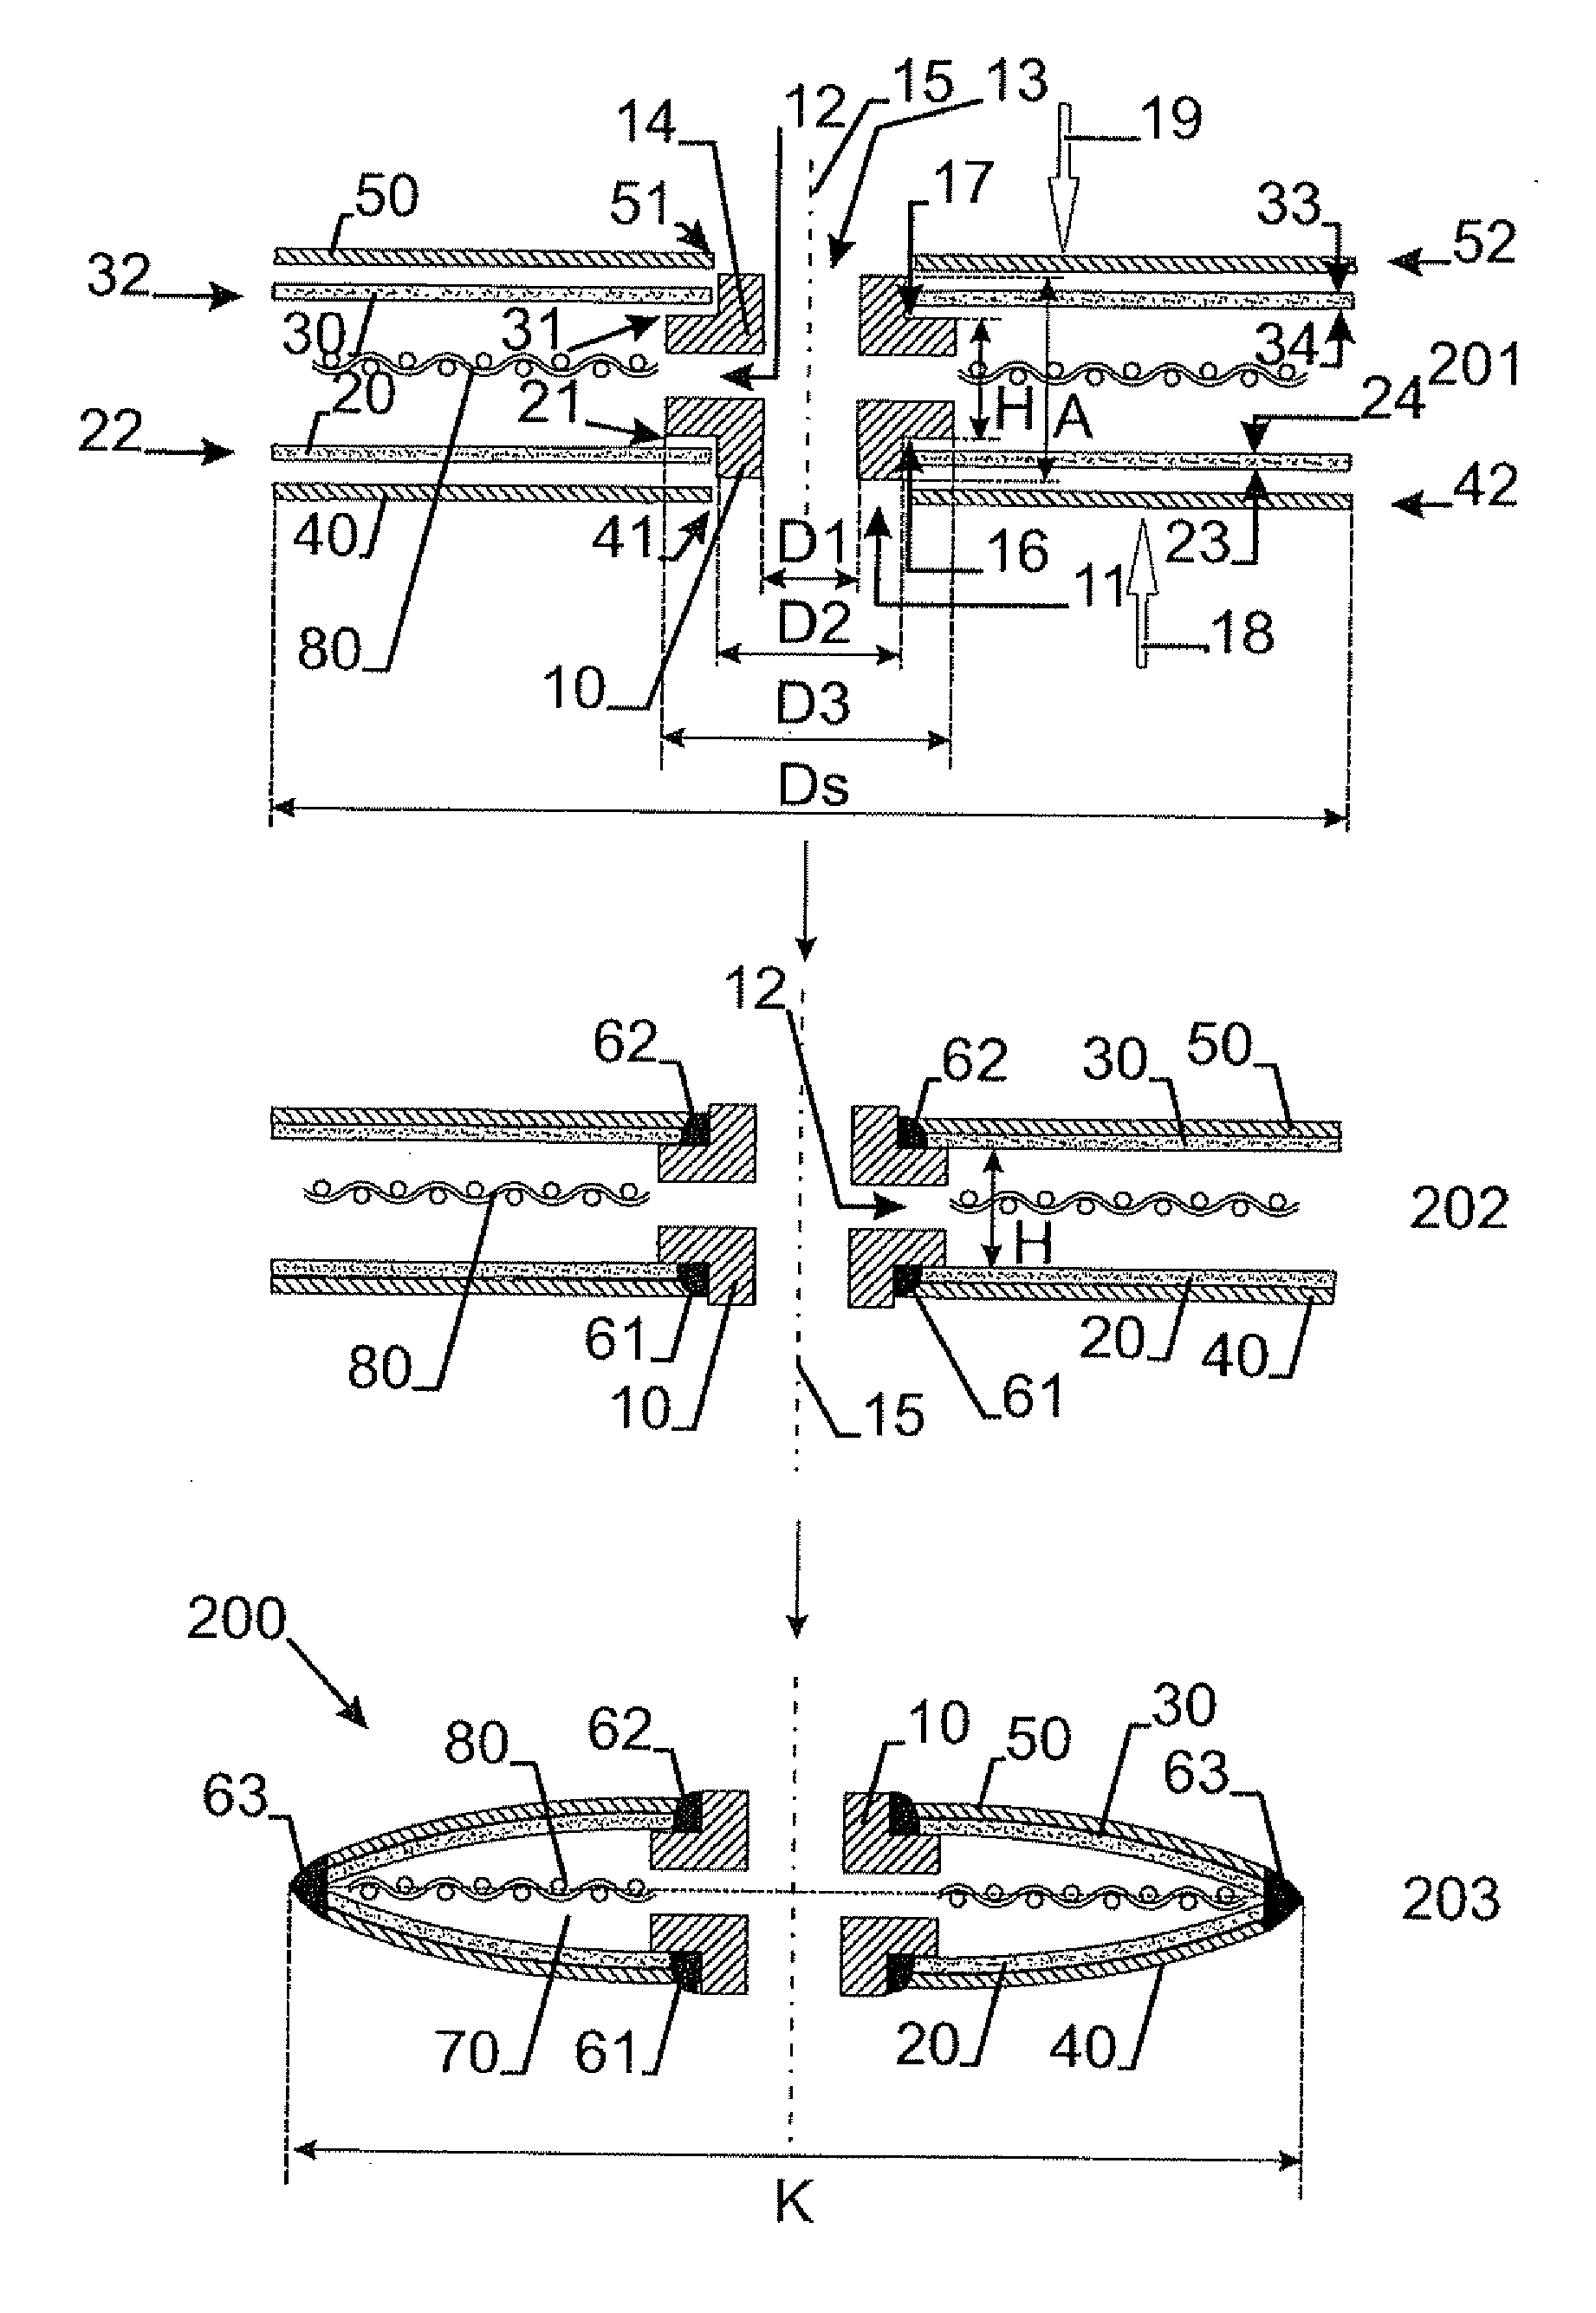 Disc-shaped filter elements and methods to provide disc-shaped filter elements